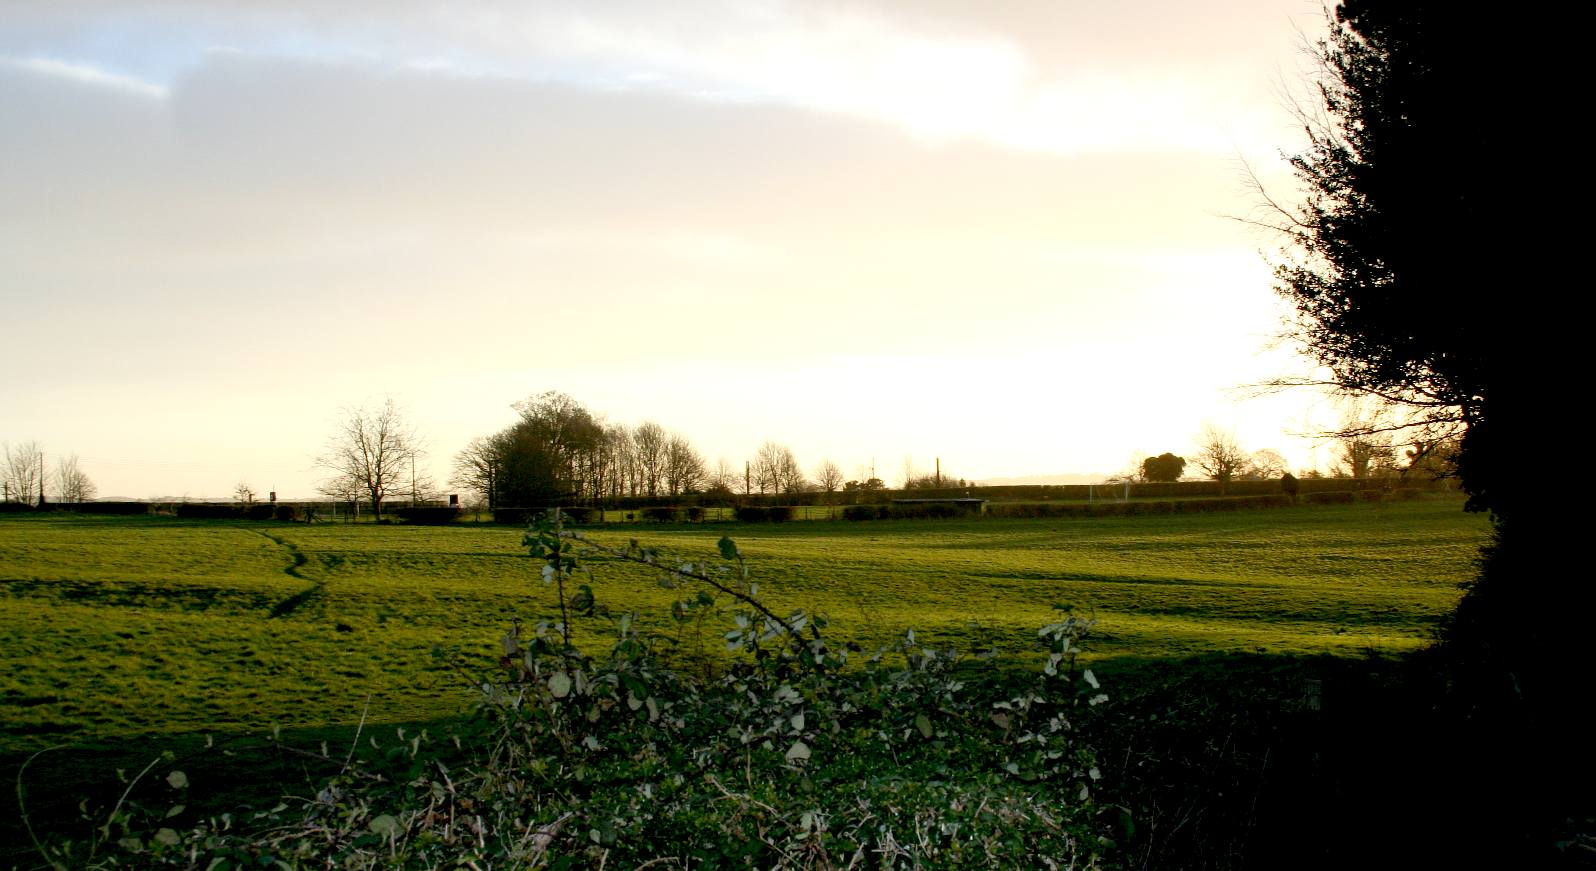 View across unspolied countryside to area of outstanding natural beauty